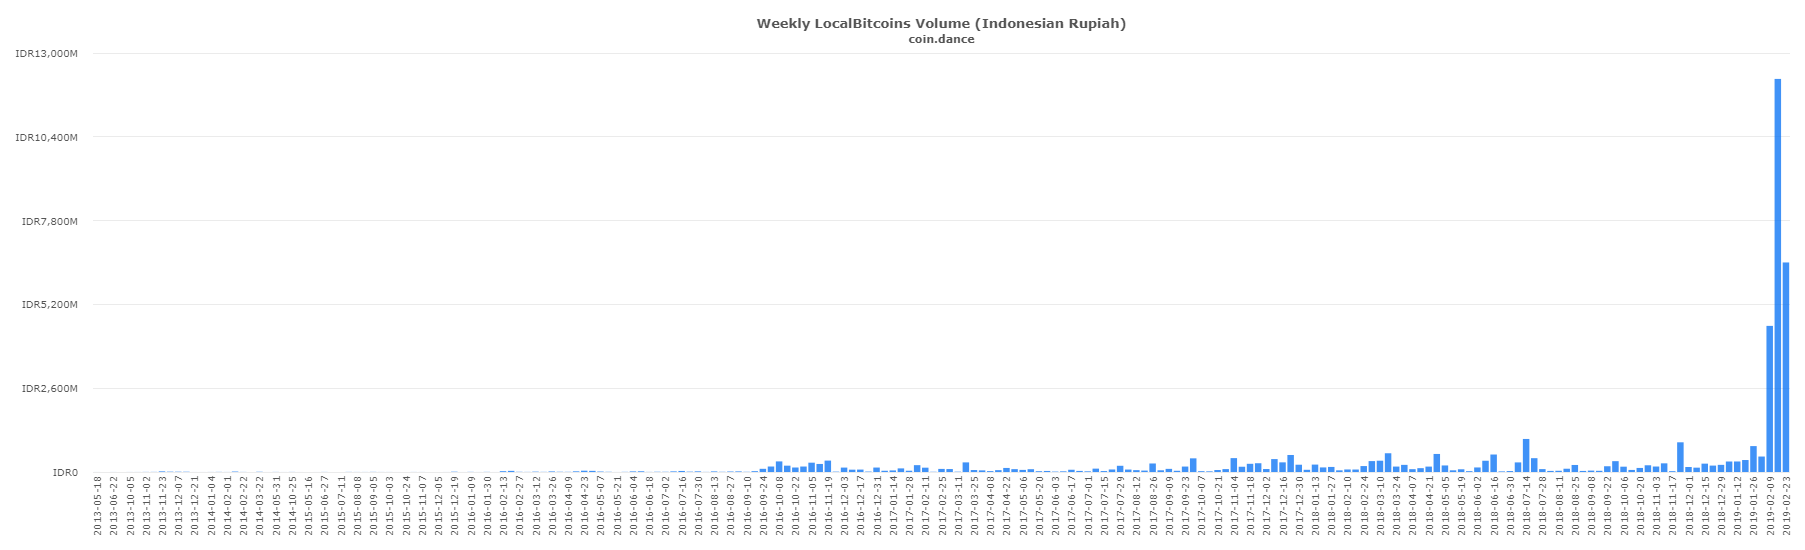 P2P Markets Report: Iranian Localbitcoins Volume Gains 190% in a Week